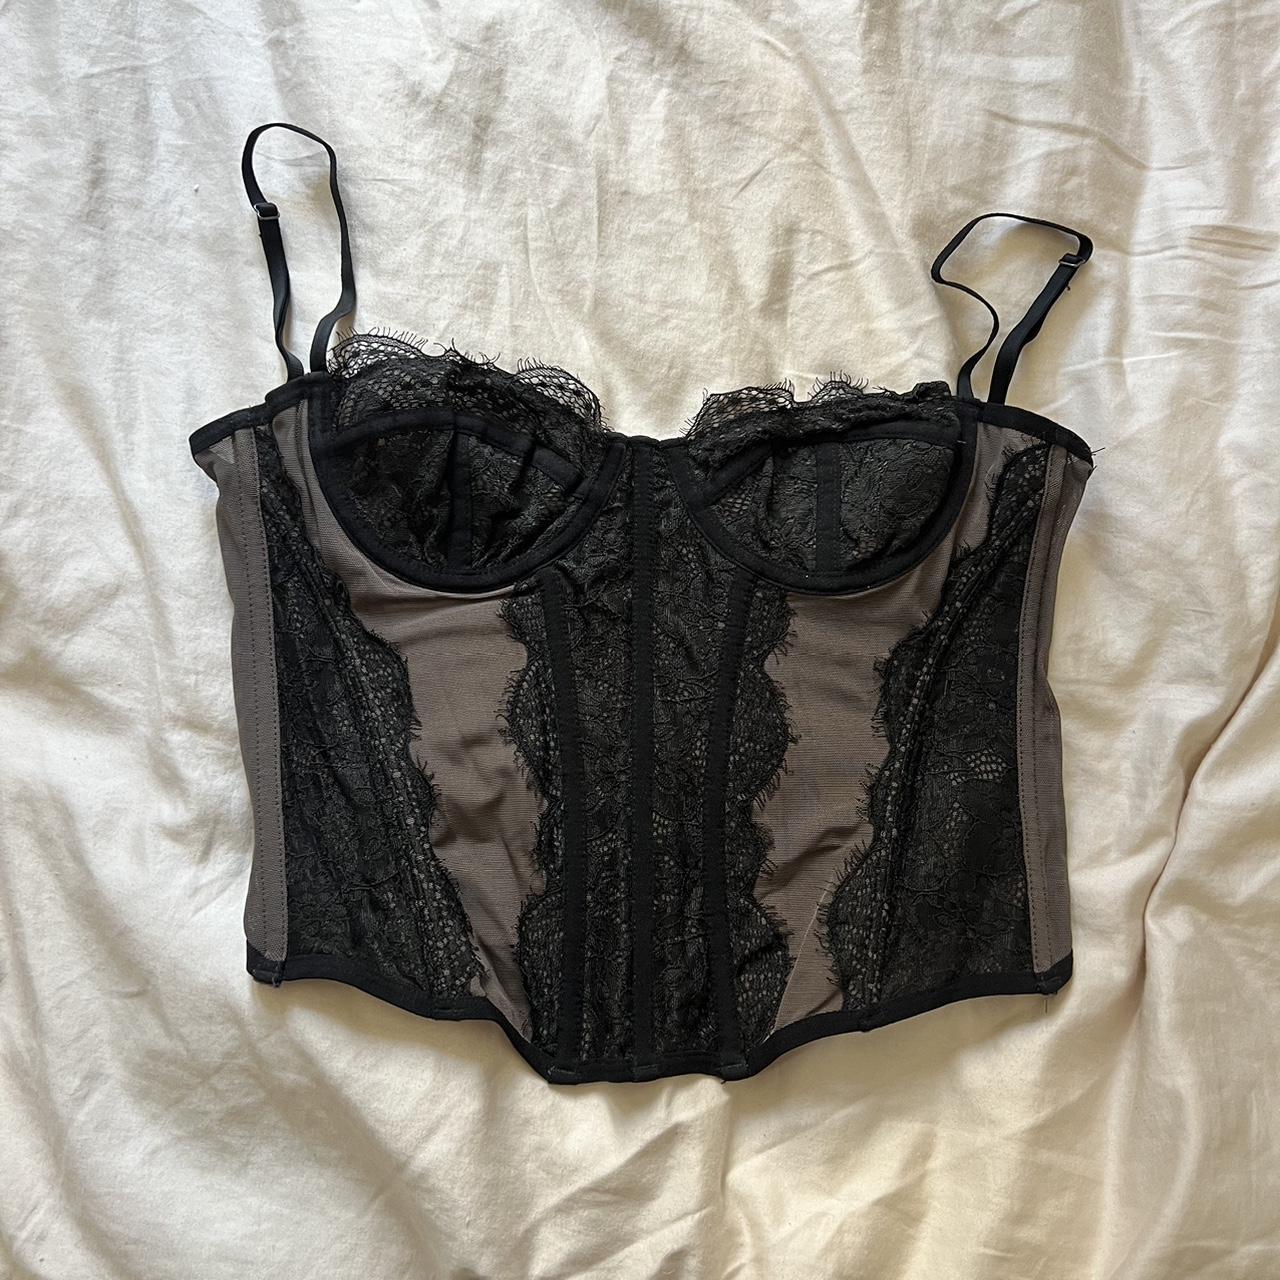 see through corset top #urbanoutfitters #goingout - Depop